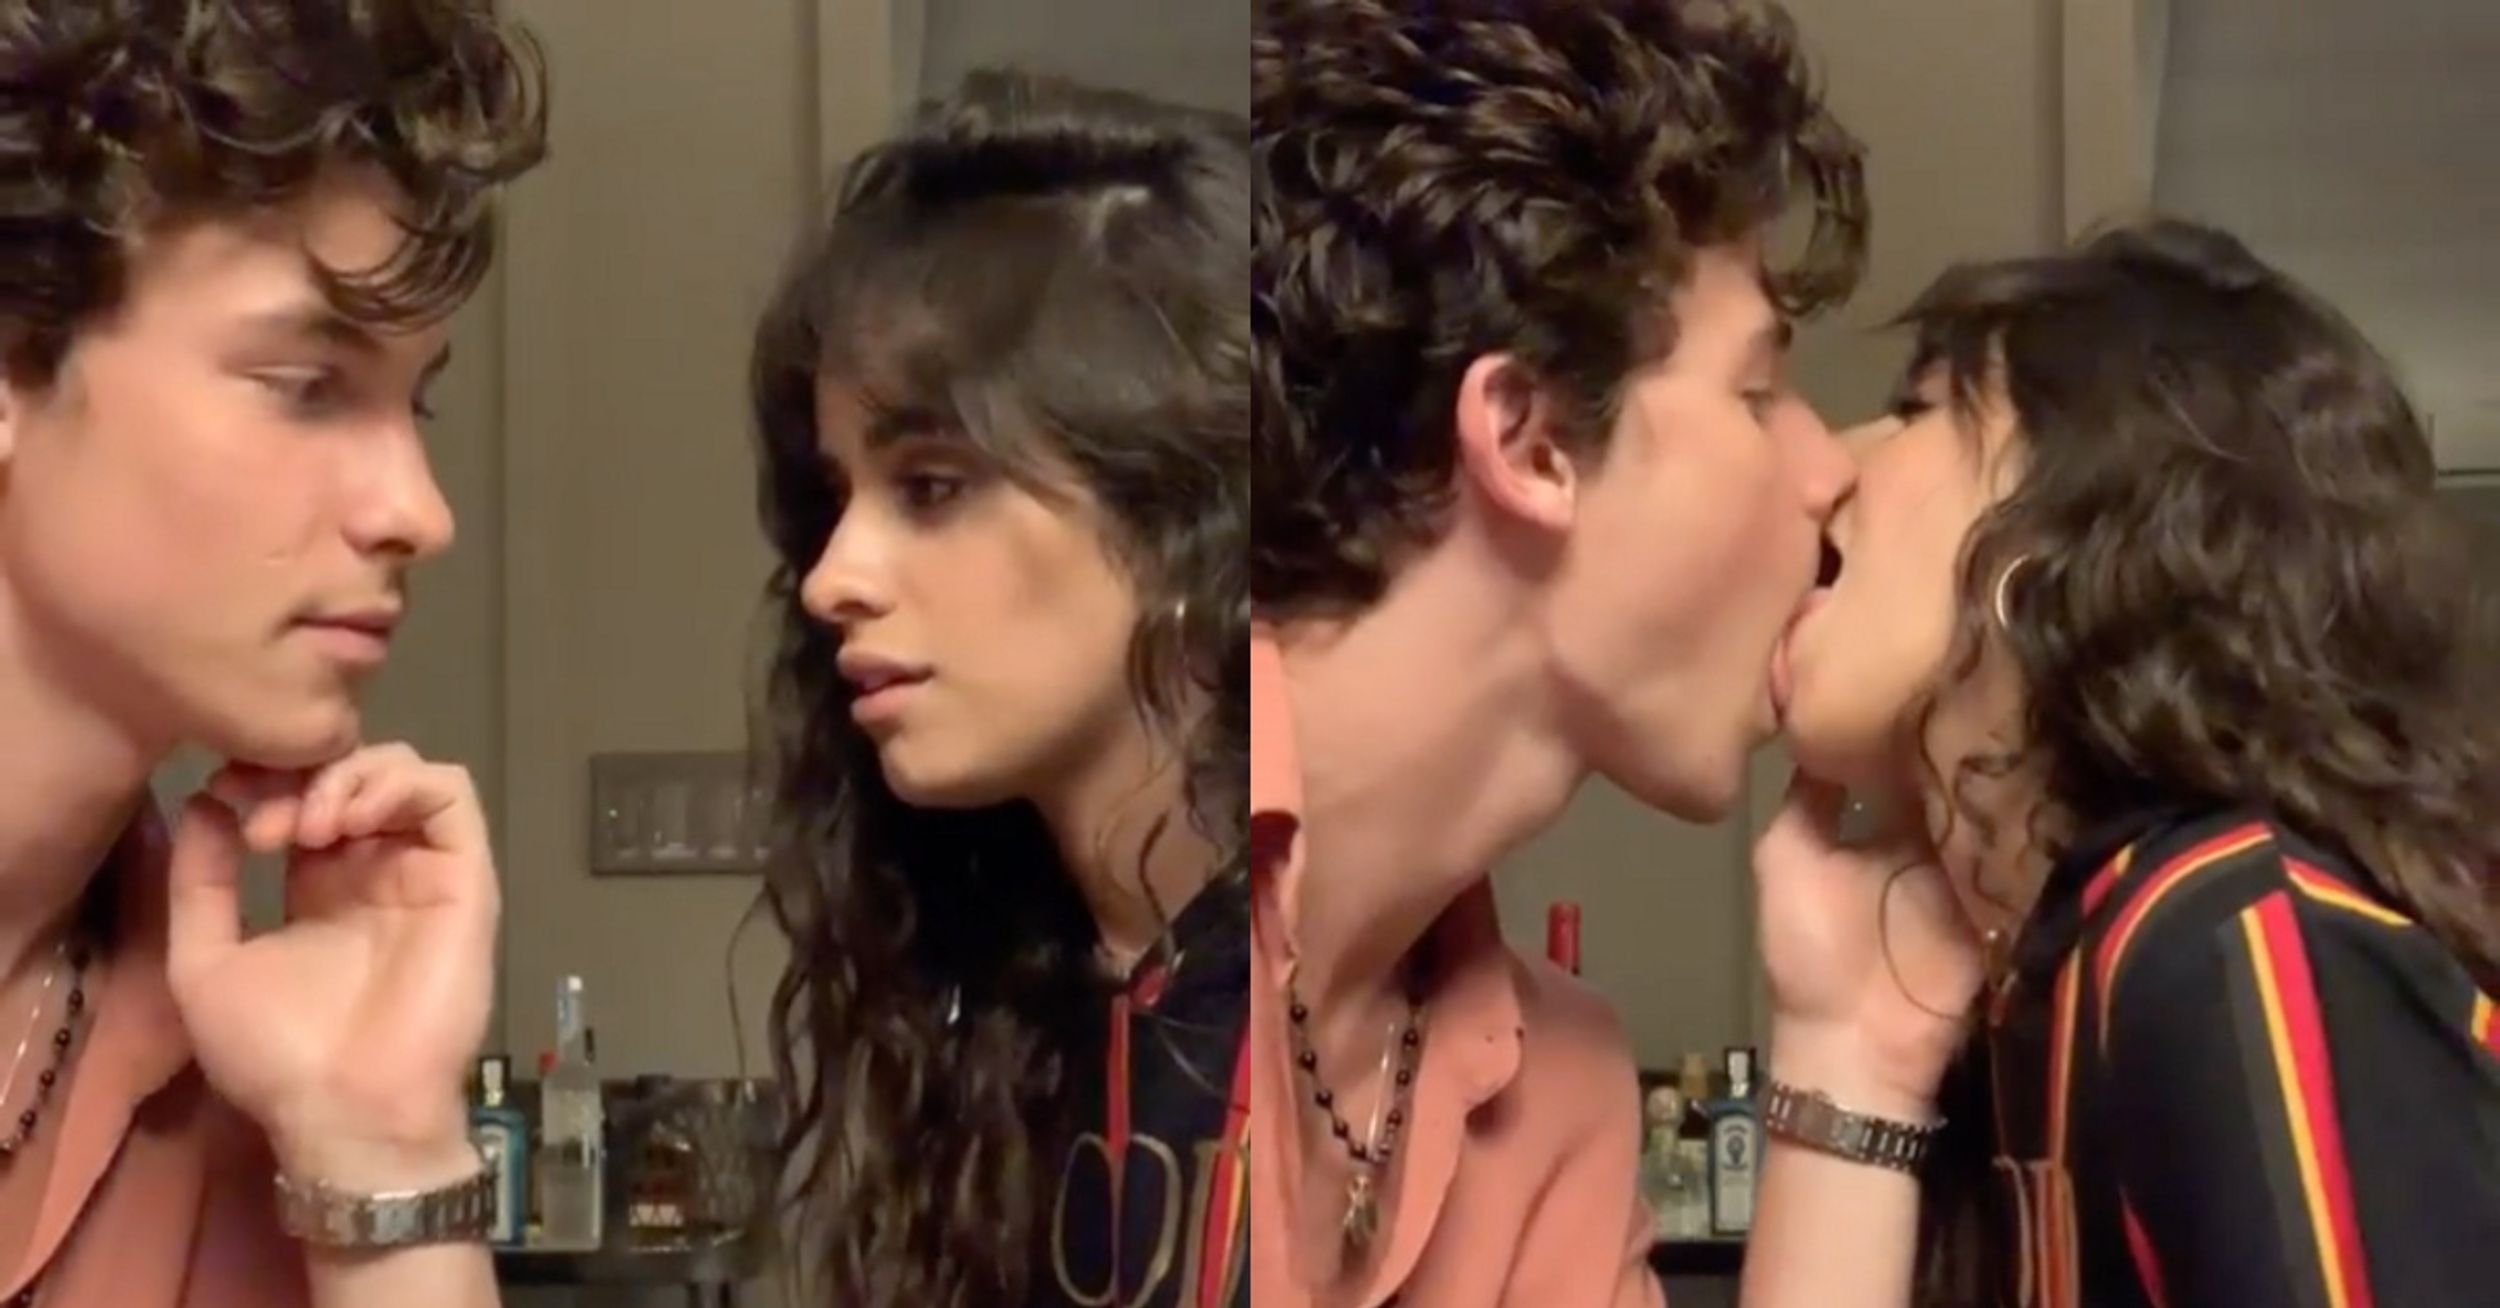 Shawn Mendes And Camila Cabello Shared A Bizarre Kissing Video That Has People Weirded Out